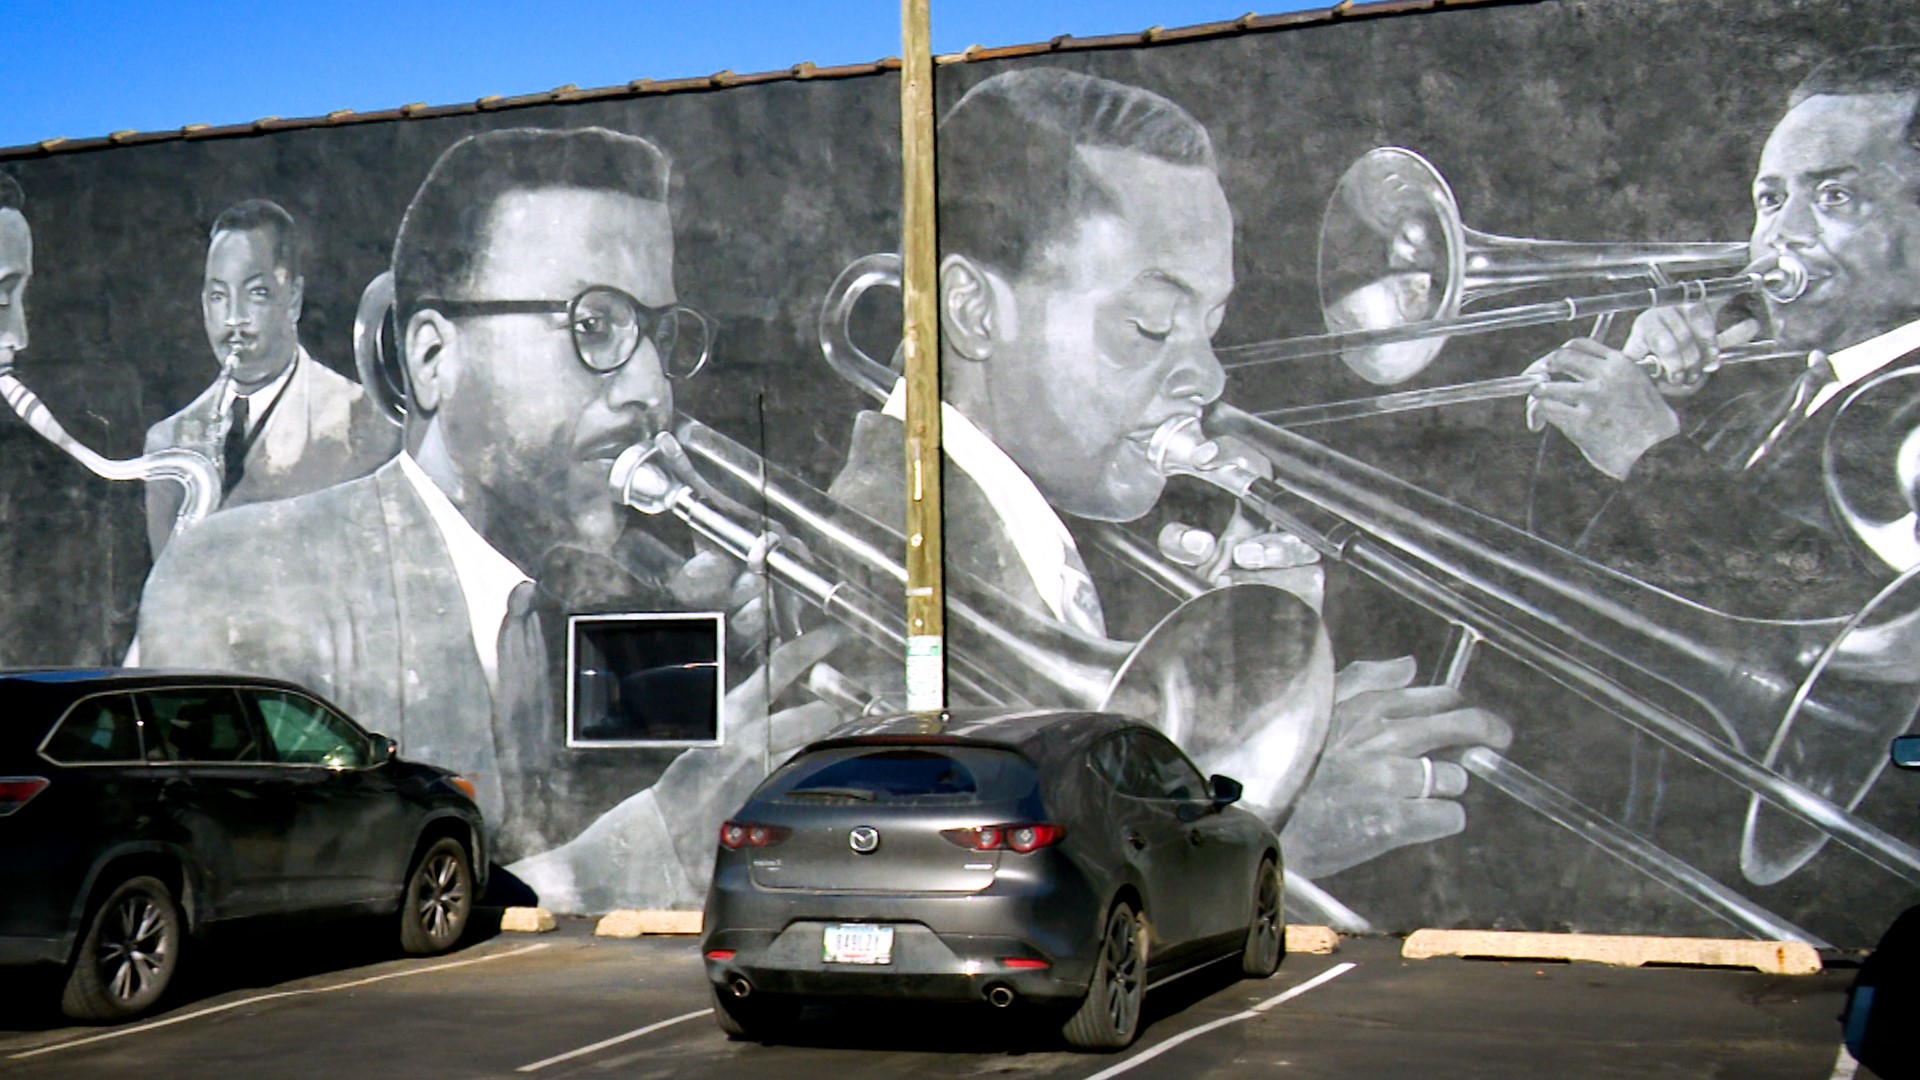 Tour guide Sampson Levingston showed Carlos the Jazz Masters Mural on the side of Musicians' Repair & Sales.